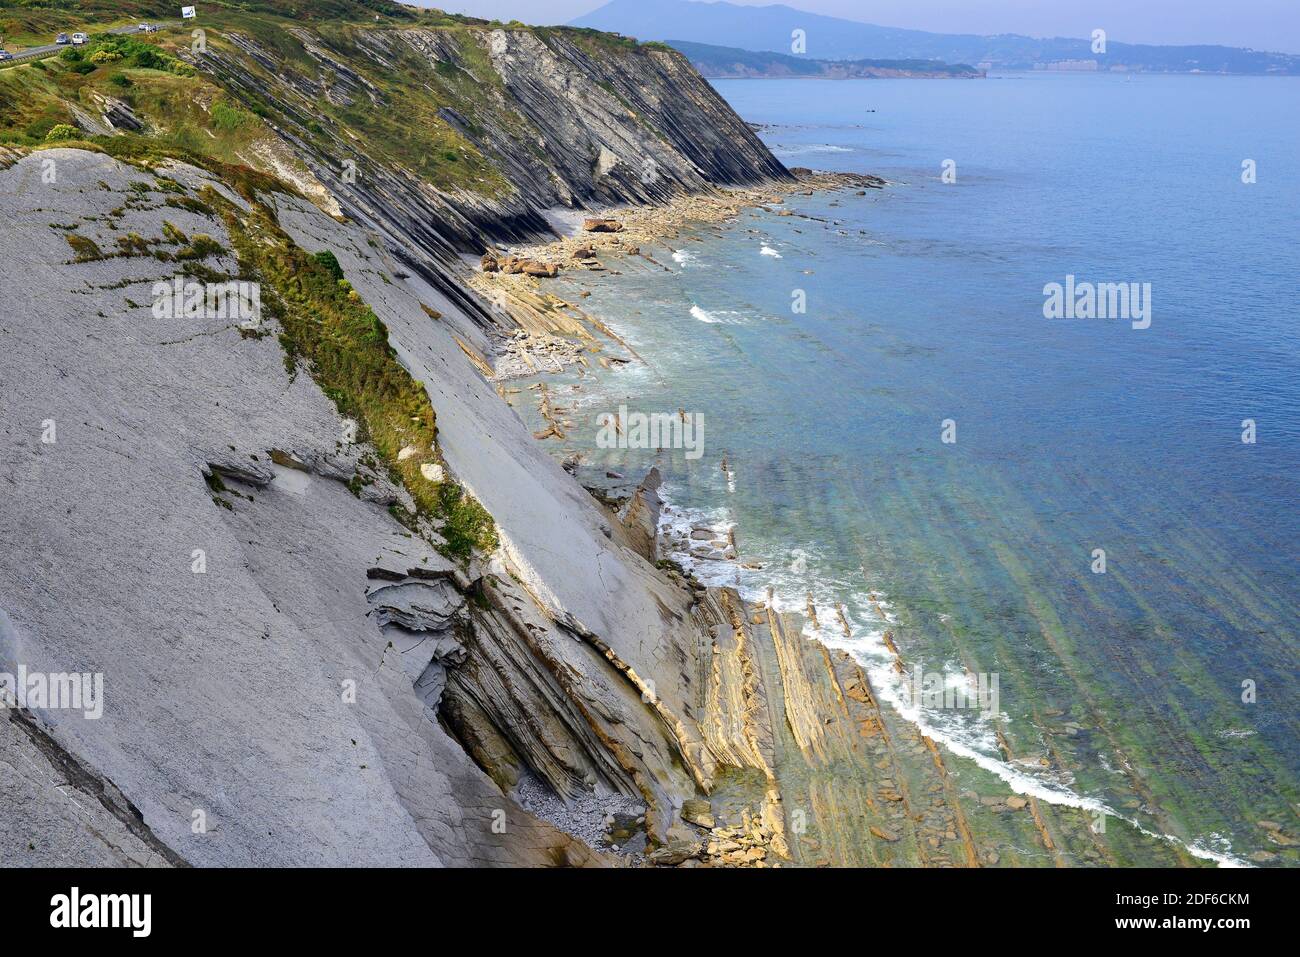 Flysch; sequence of sedimentary rocks softs and hards depositeds in a deep marine waters during early stage of the orogenesis. This photo was taken Stock Photo